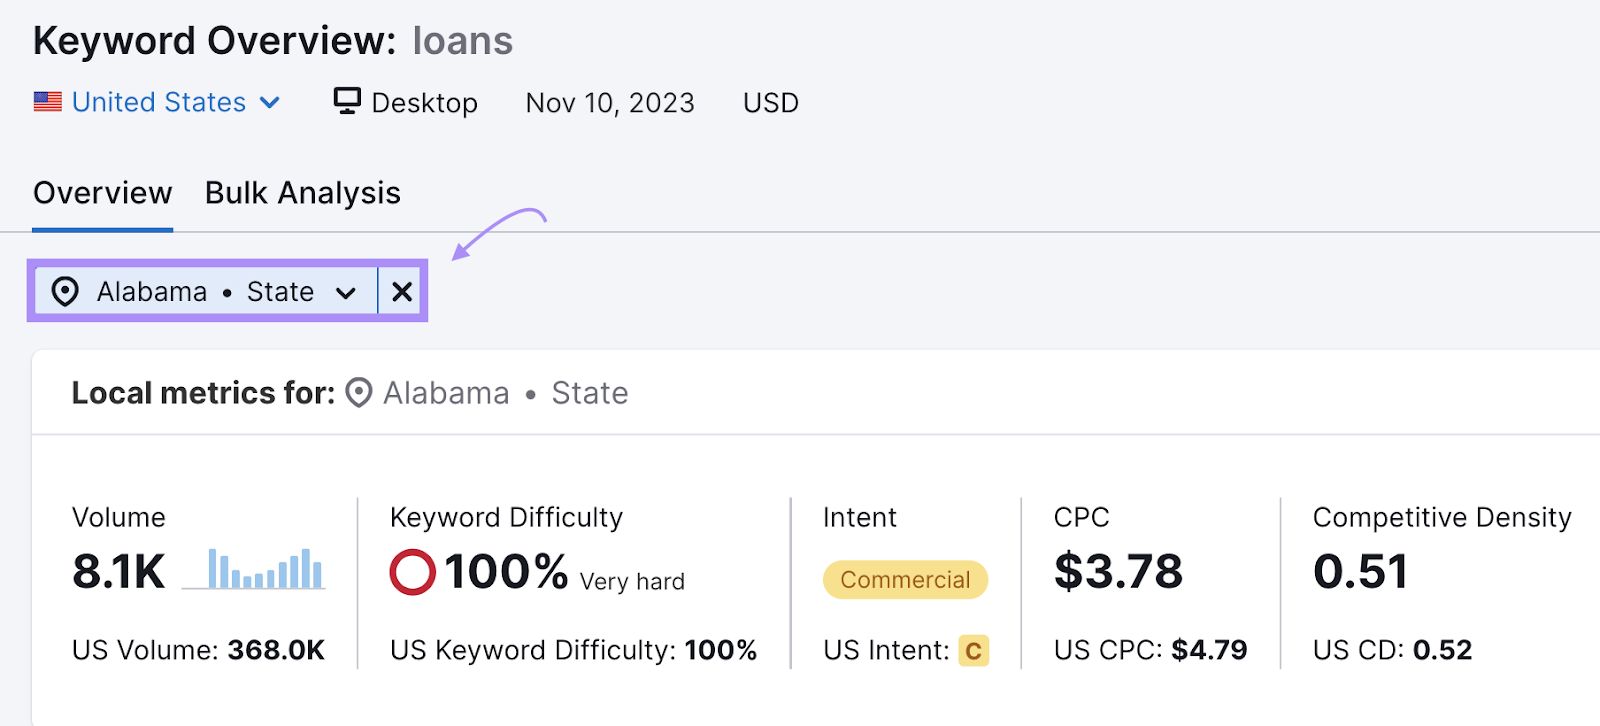 Keyword Overview results for "loans" with location set to "Alabama"